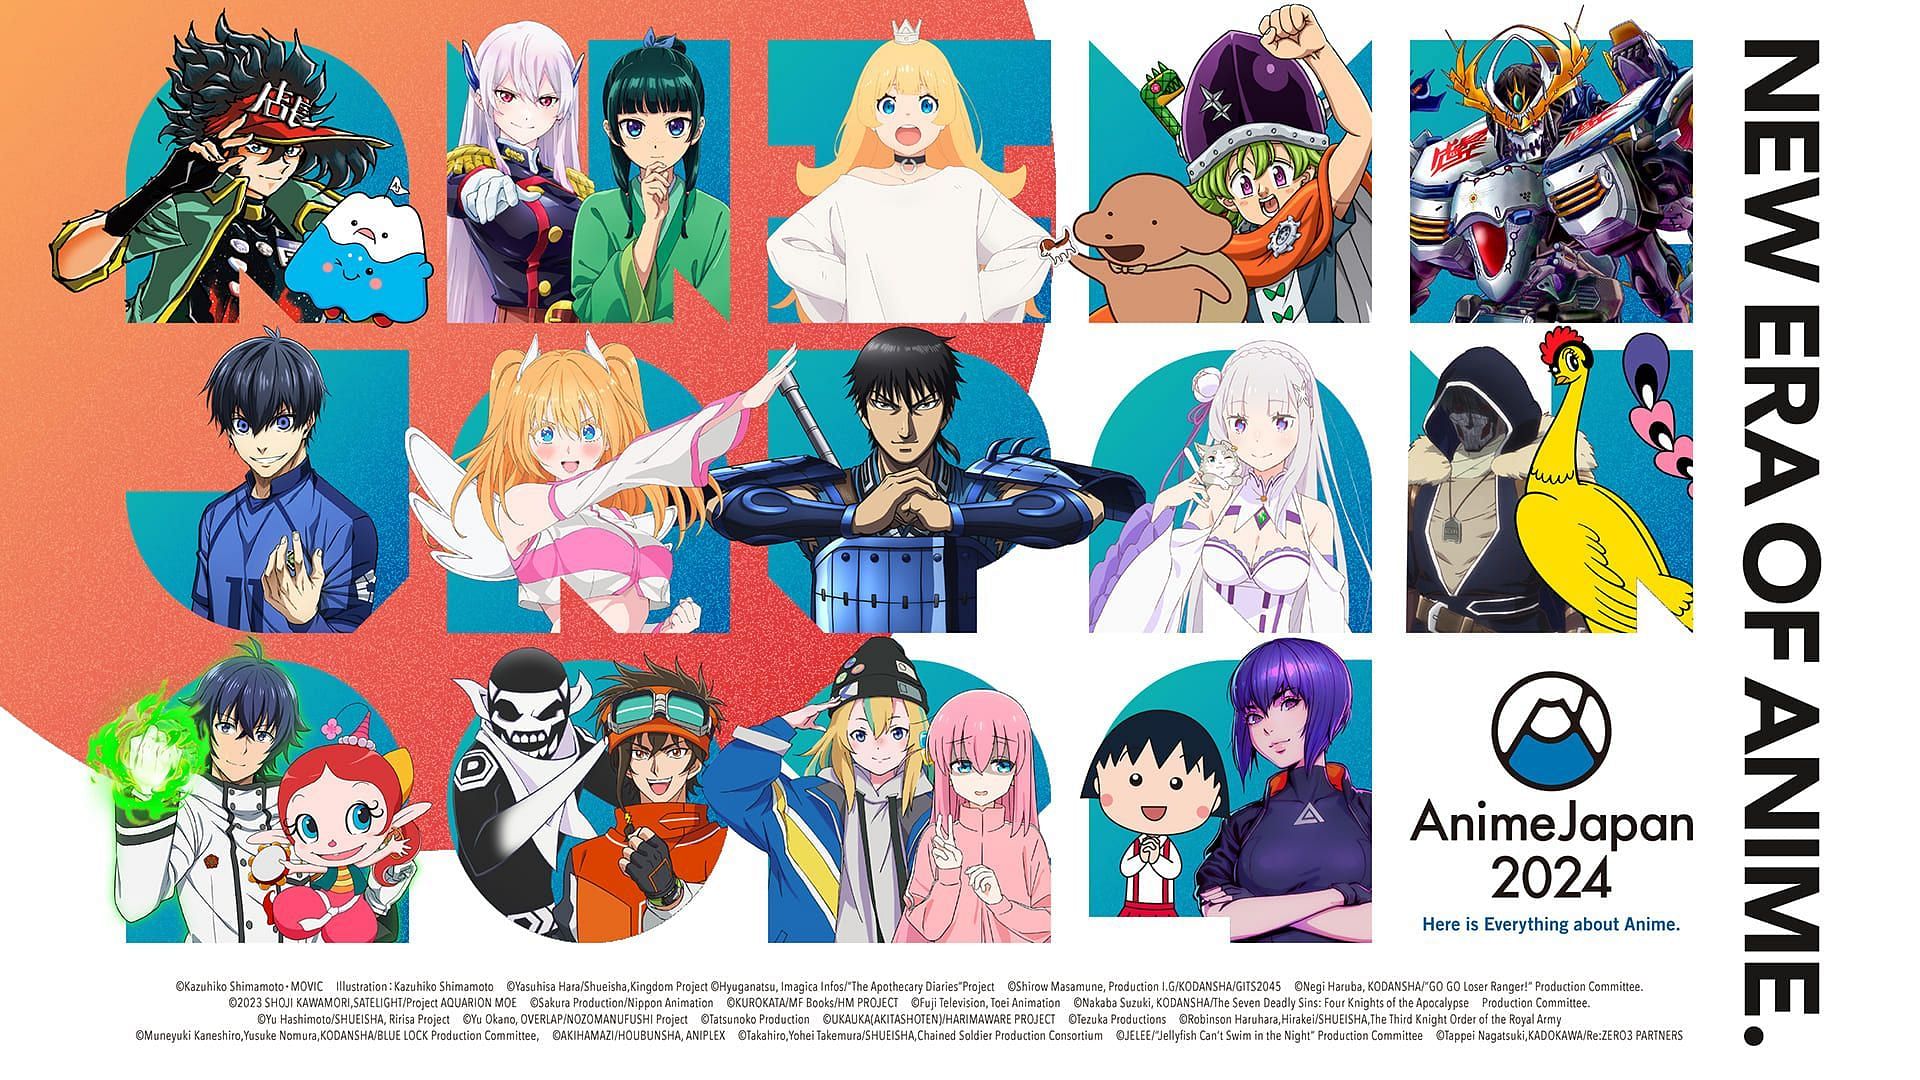 Anime Japan 2024 full schedule and what to expect (Image via Anime Japan)